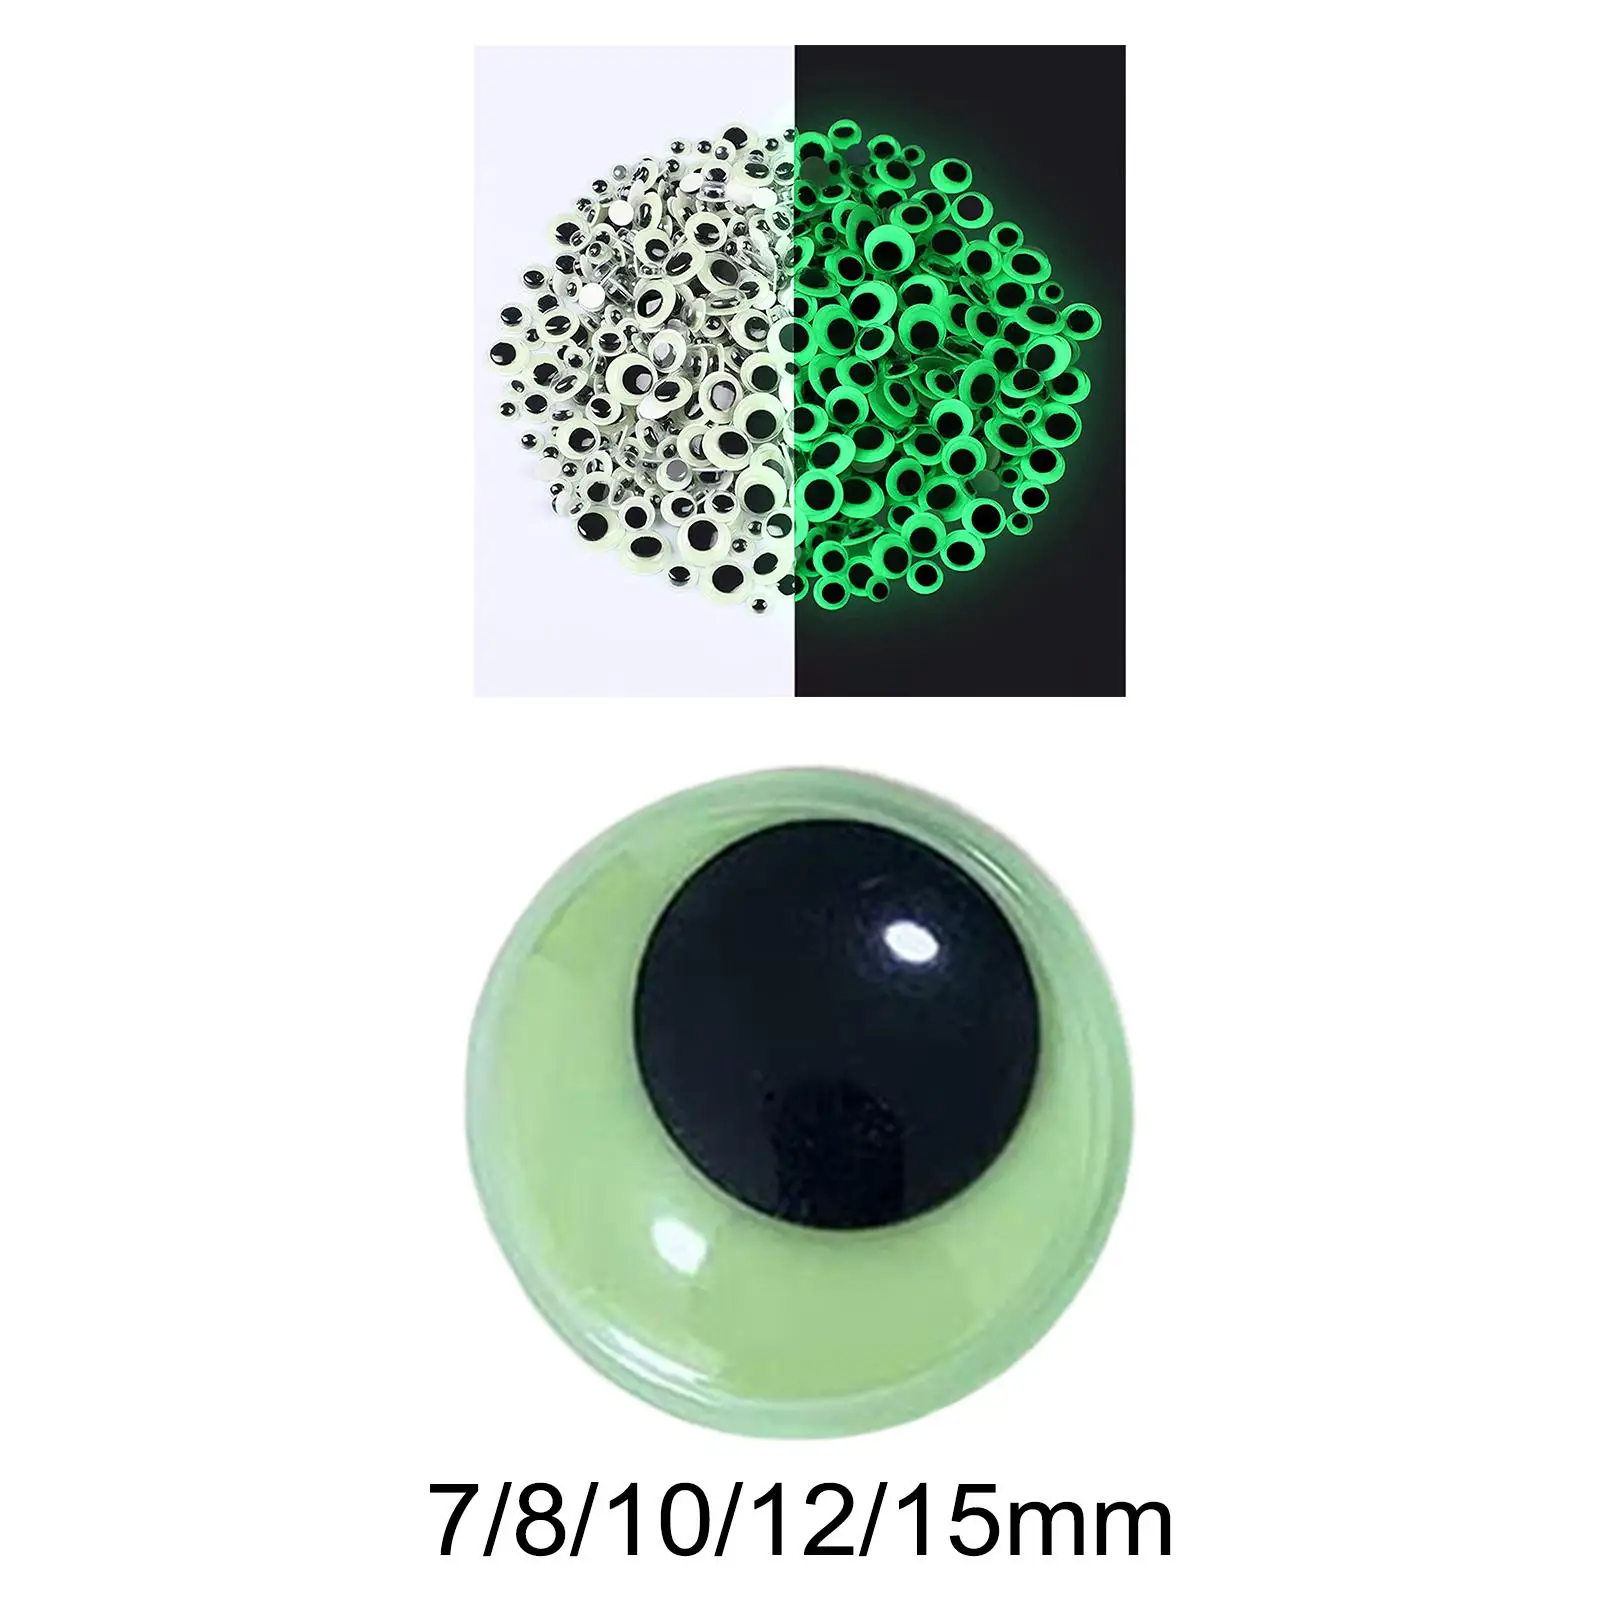 Glow in The Dark Eyes Round Stick on Sticky Movable Eyes Googly Eyes for Soft Toys Scrapbooking Crafts Decoration Halloween